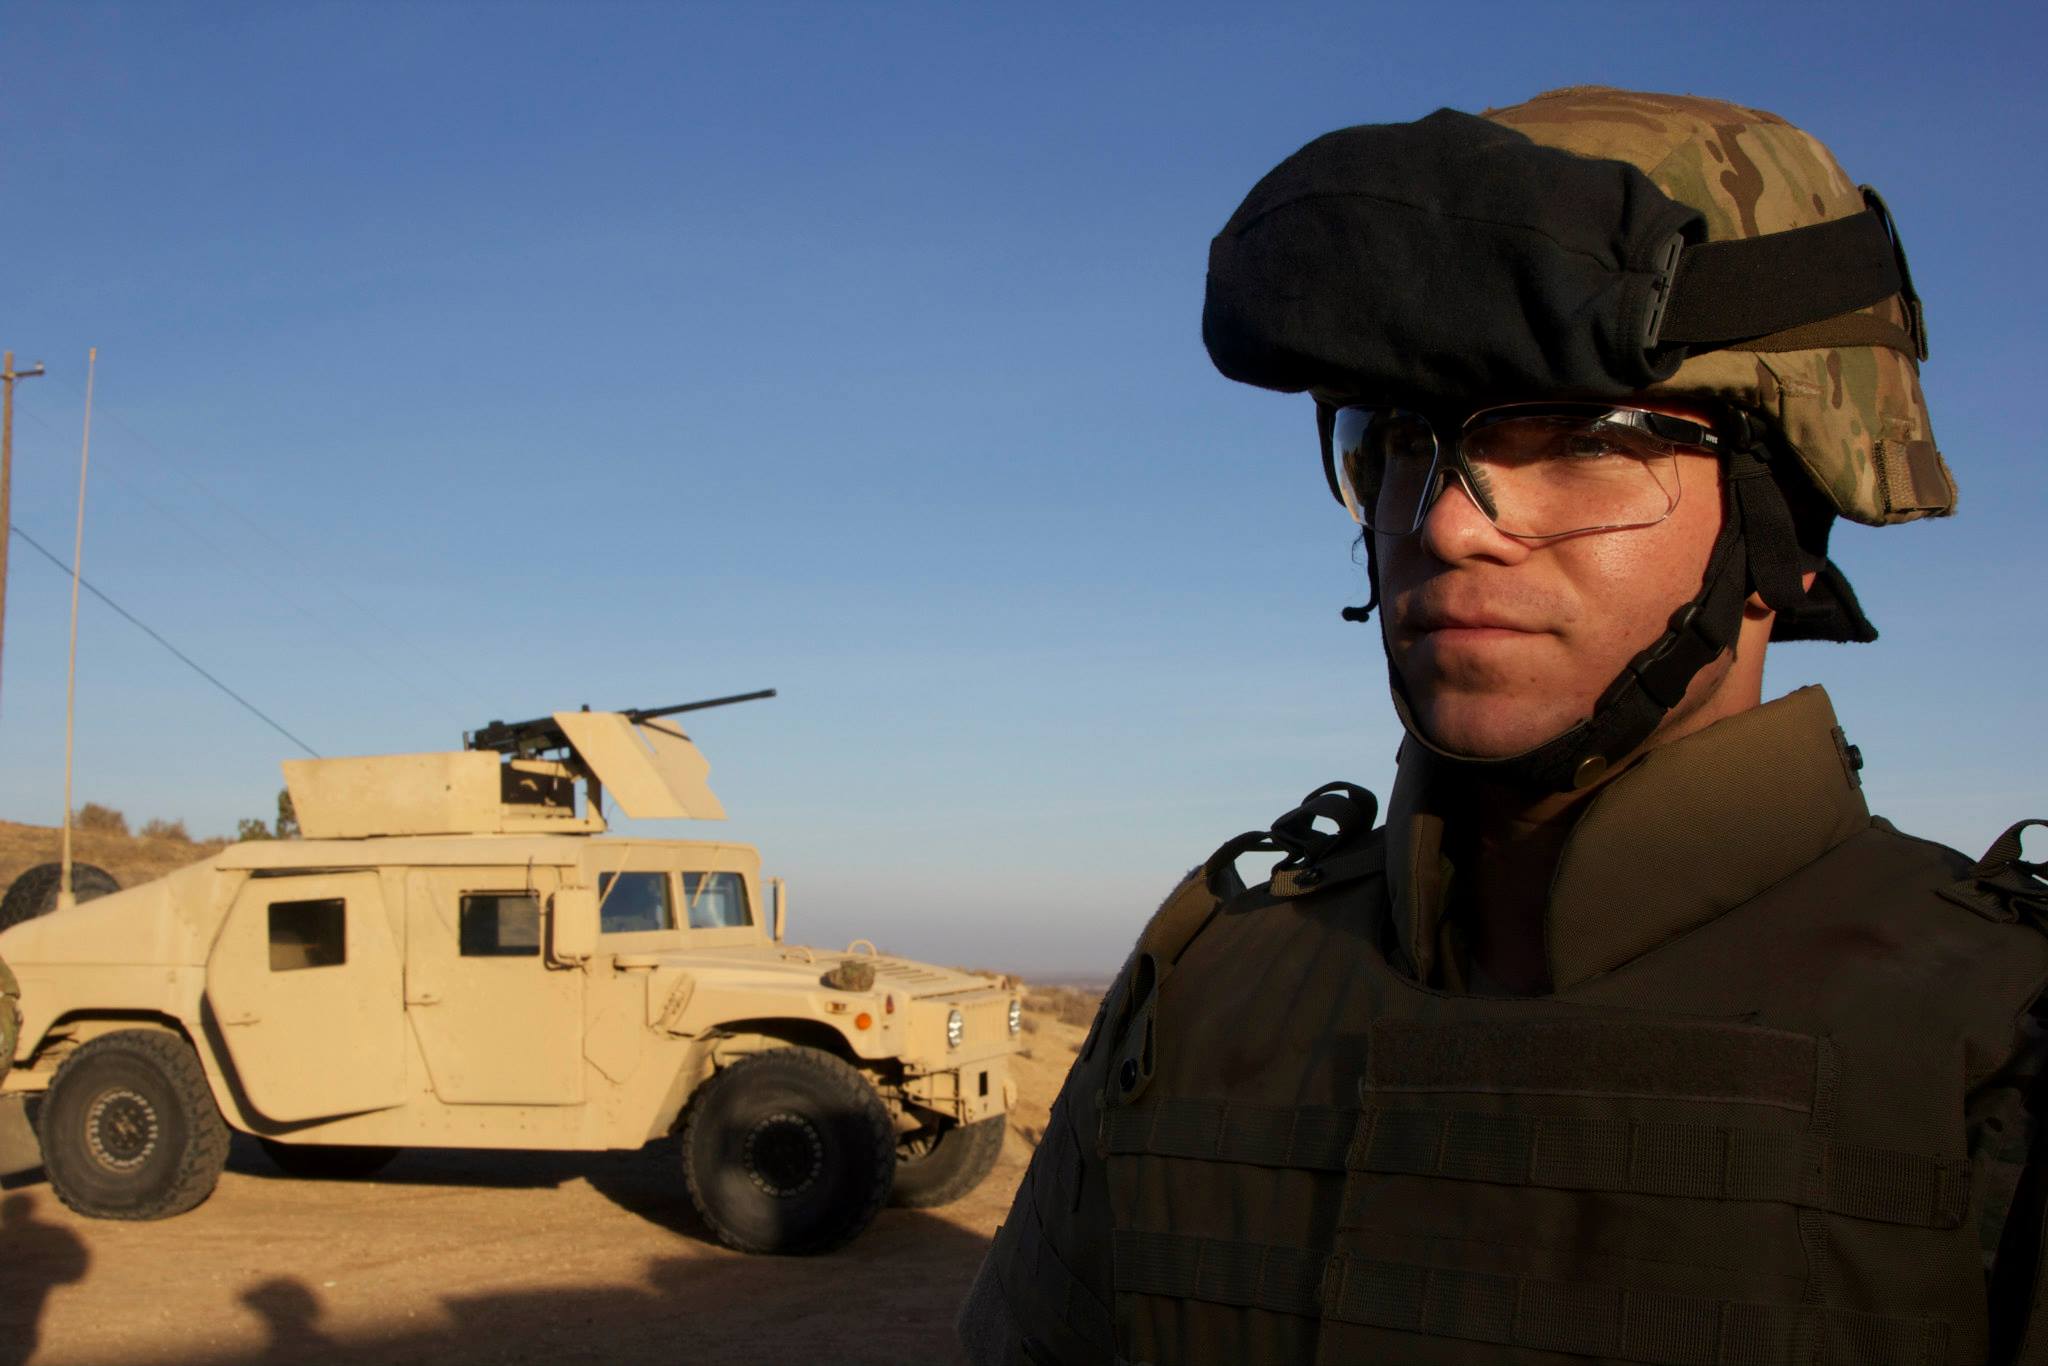 John Redlinger, pictured before driving an Army humvee during a stunt sequence.